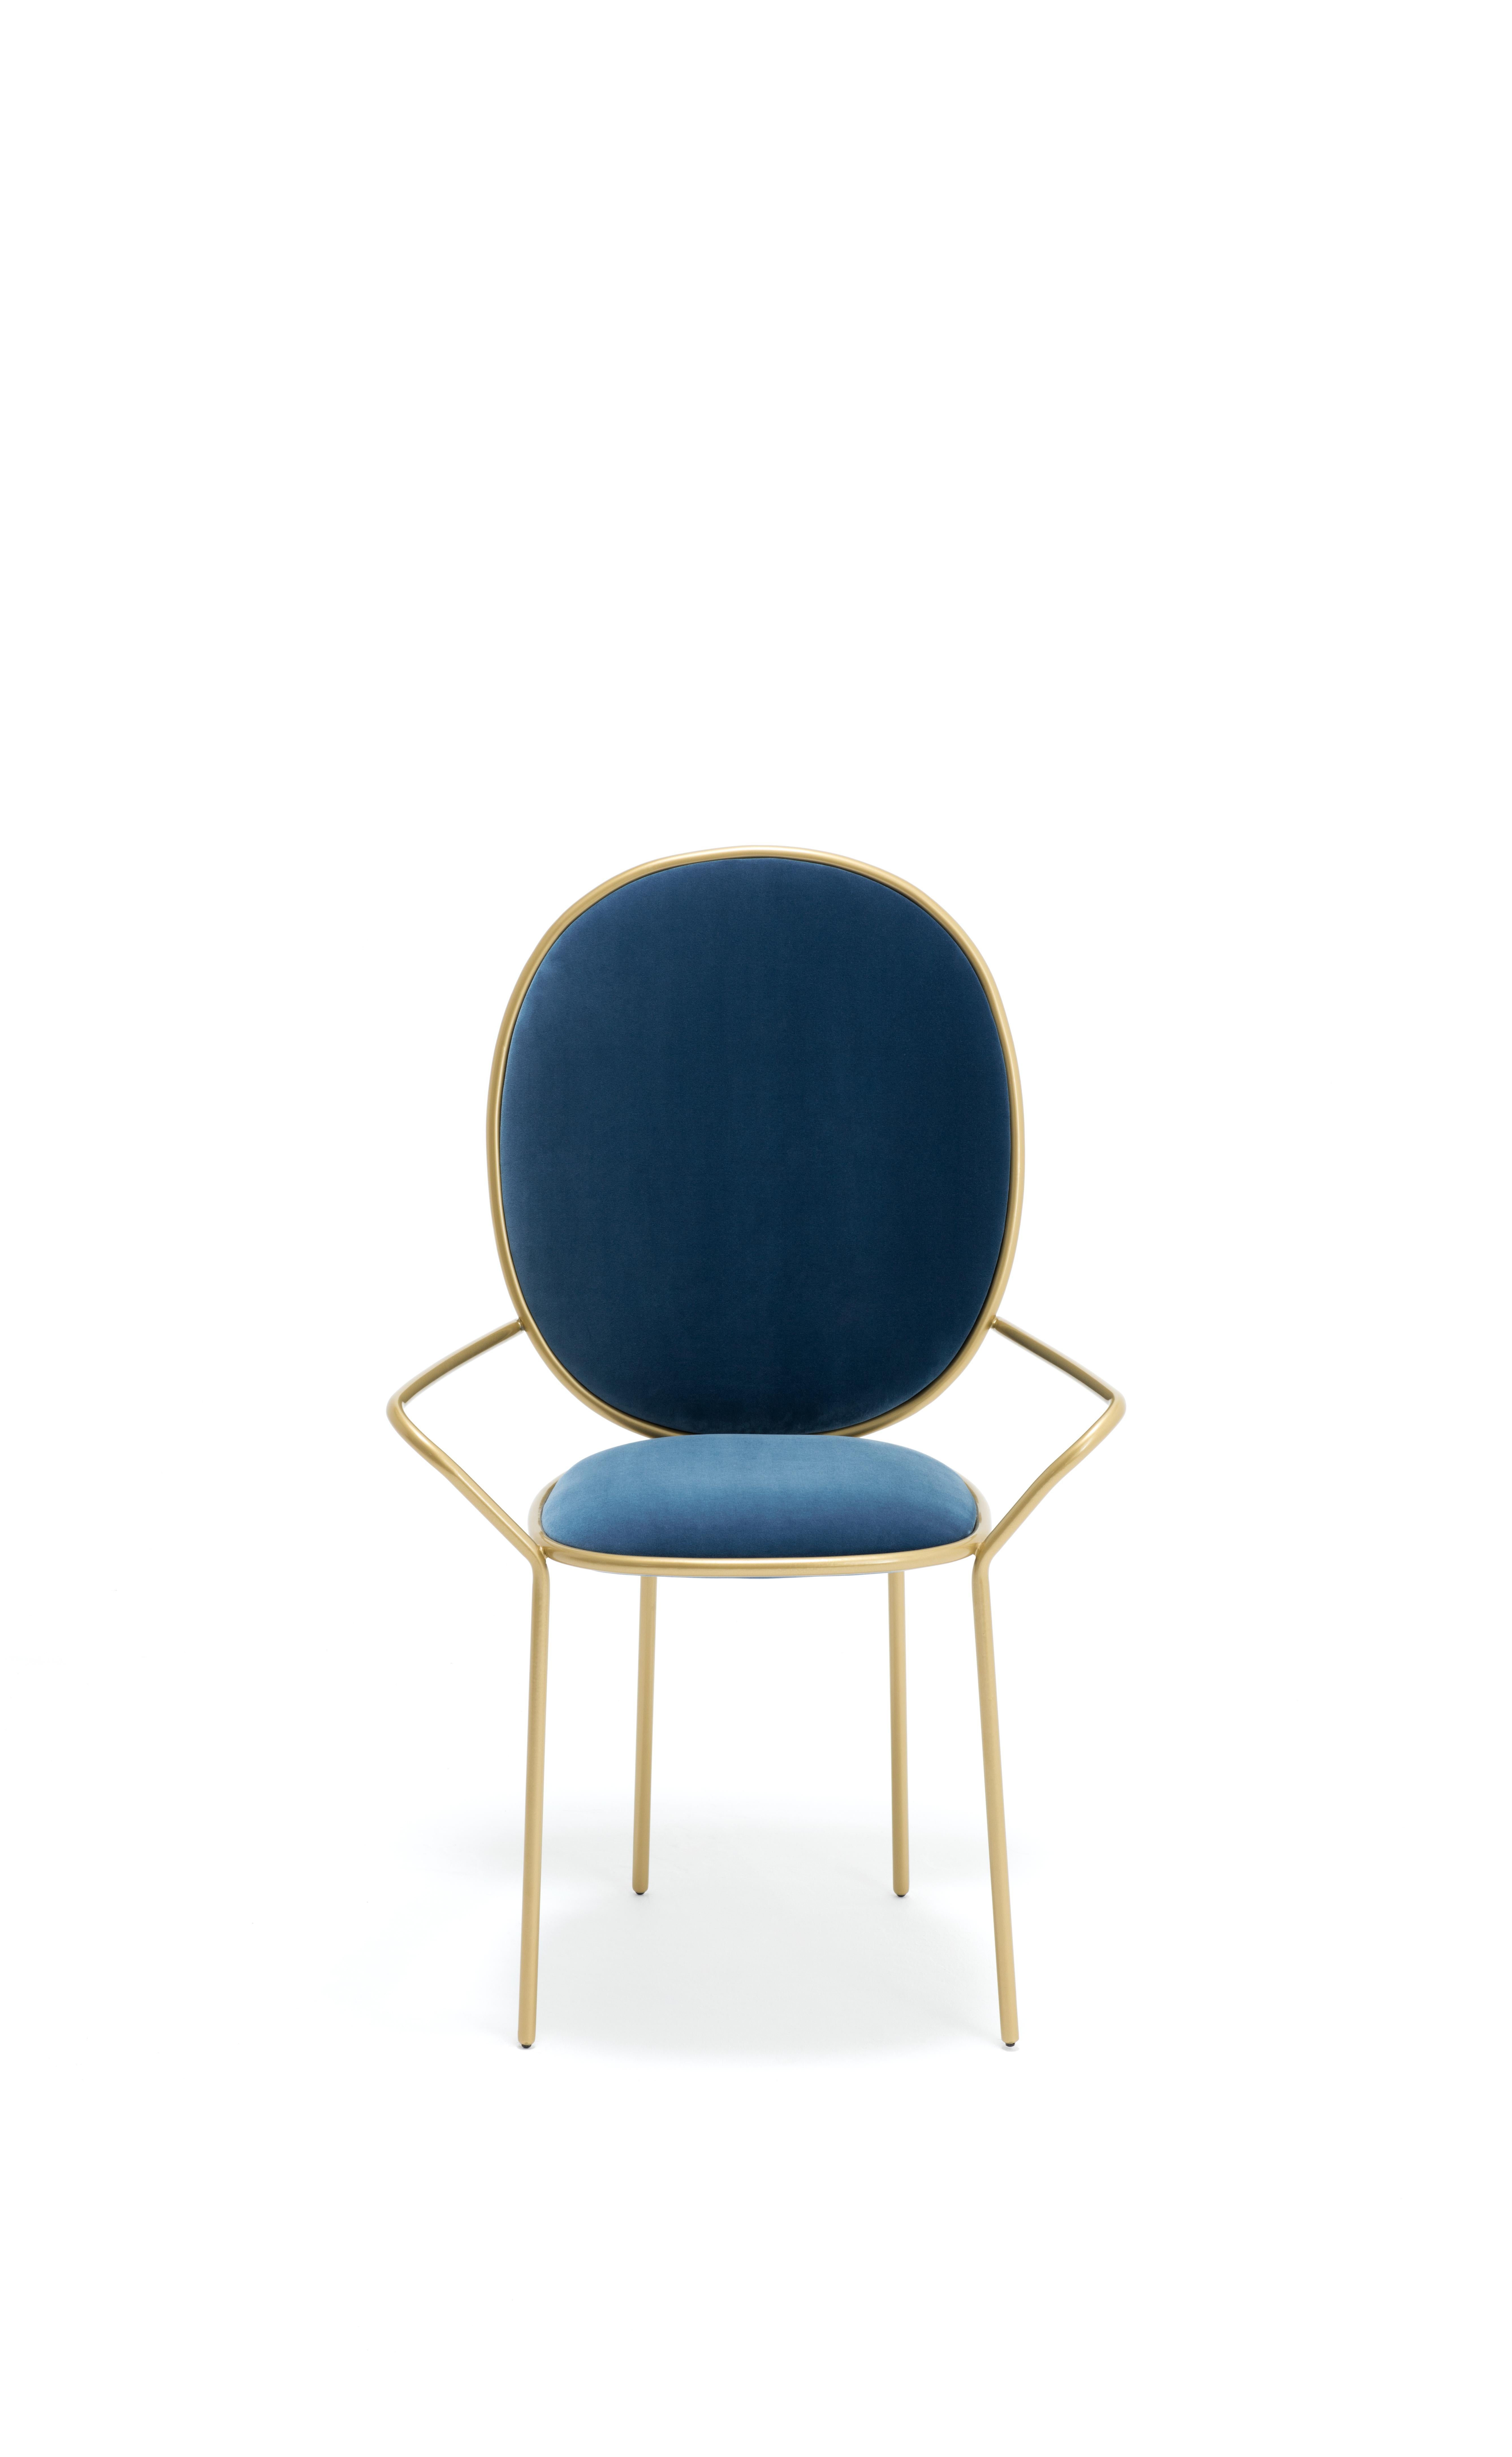 Slovenian Contemporary Avio Blue Velvet Upholstered Dining Armchair, Stay by Nika Zupanc